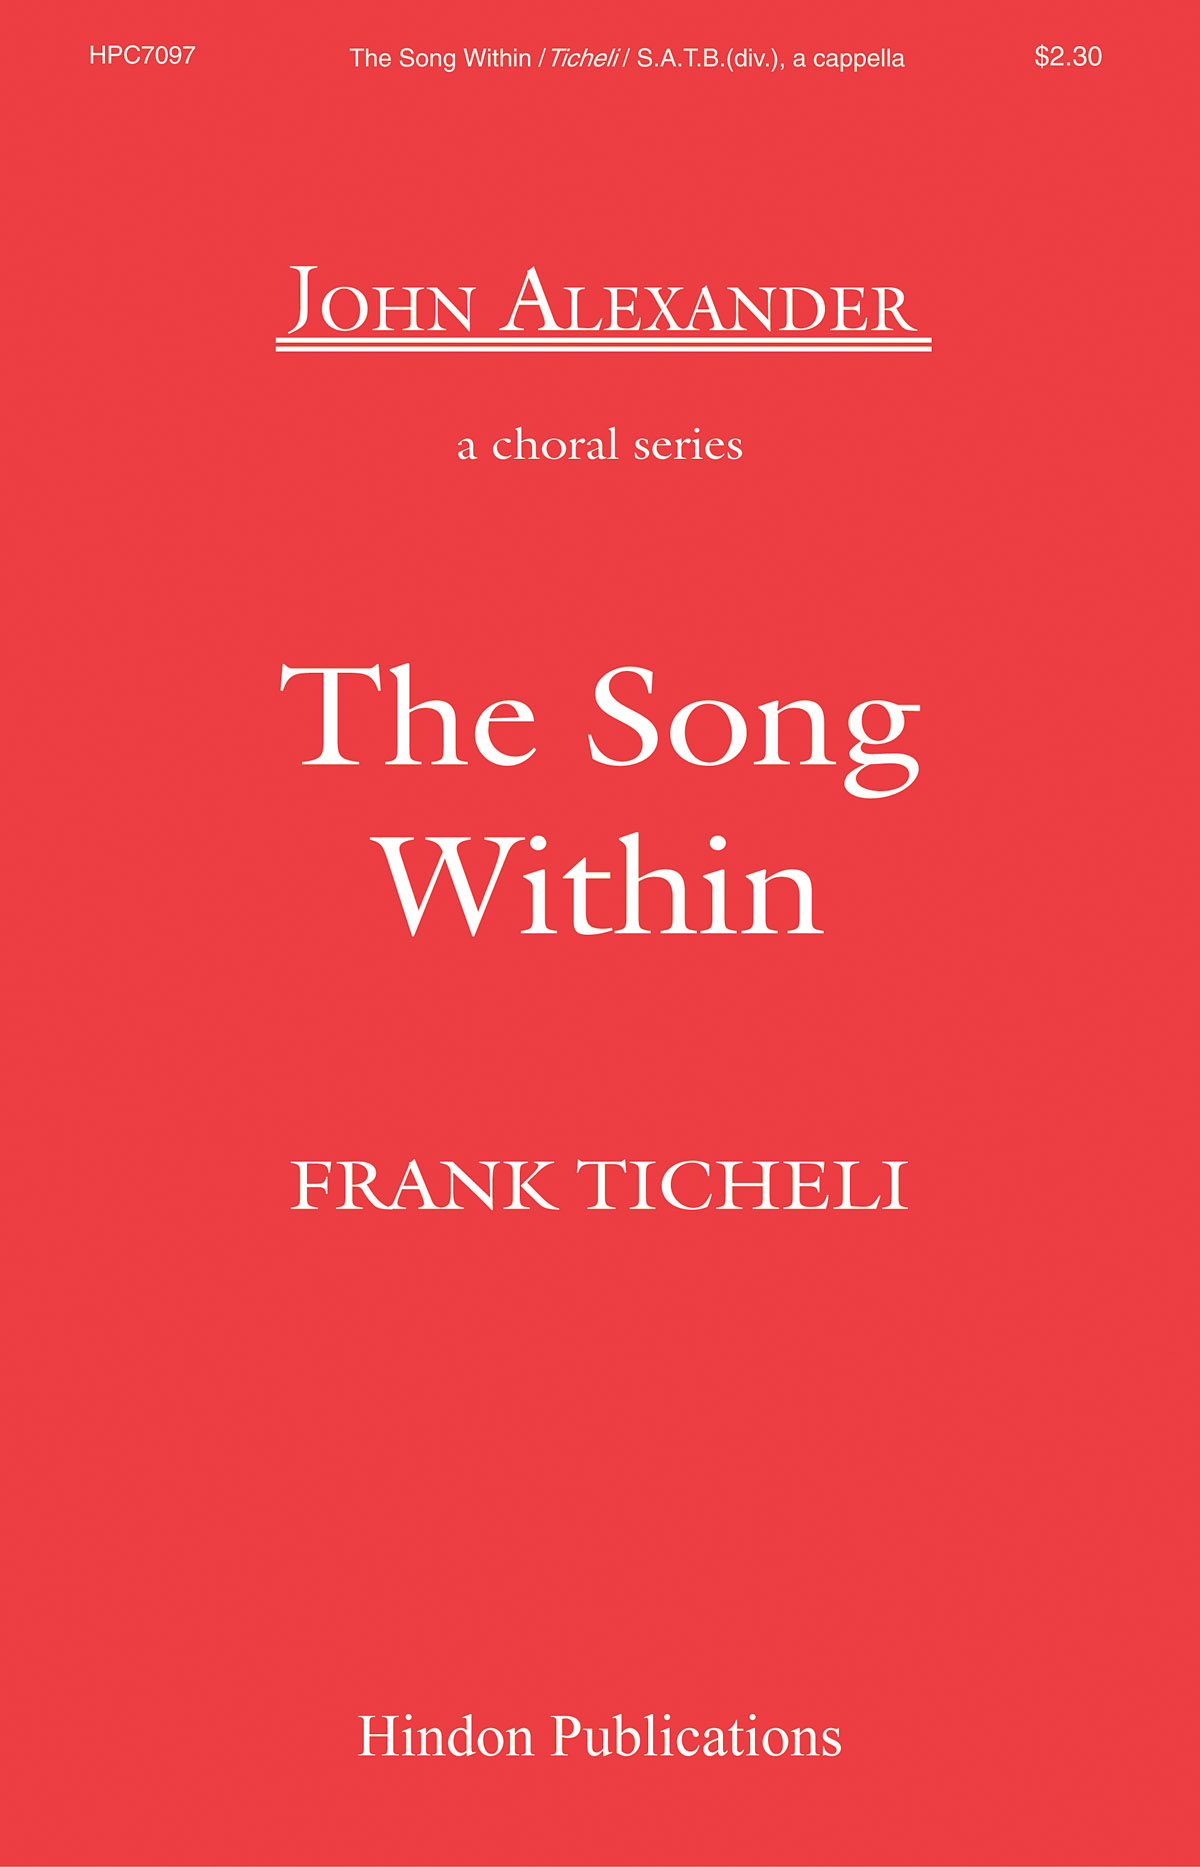 Frank Ticheli: The Song Within: SATB: Vocal Score